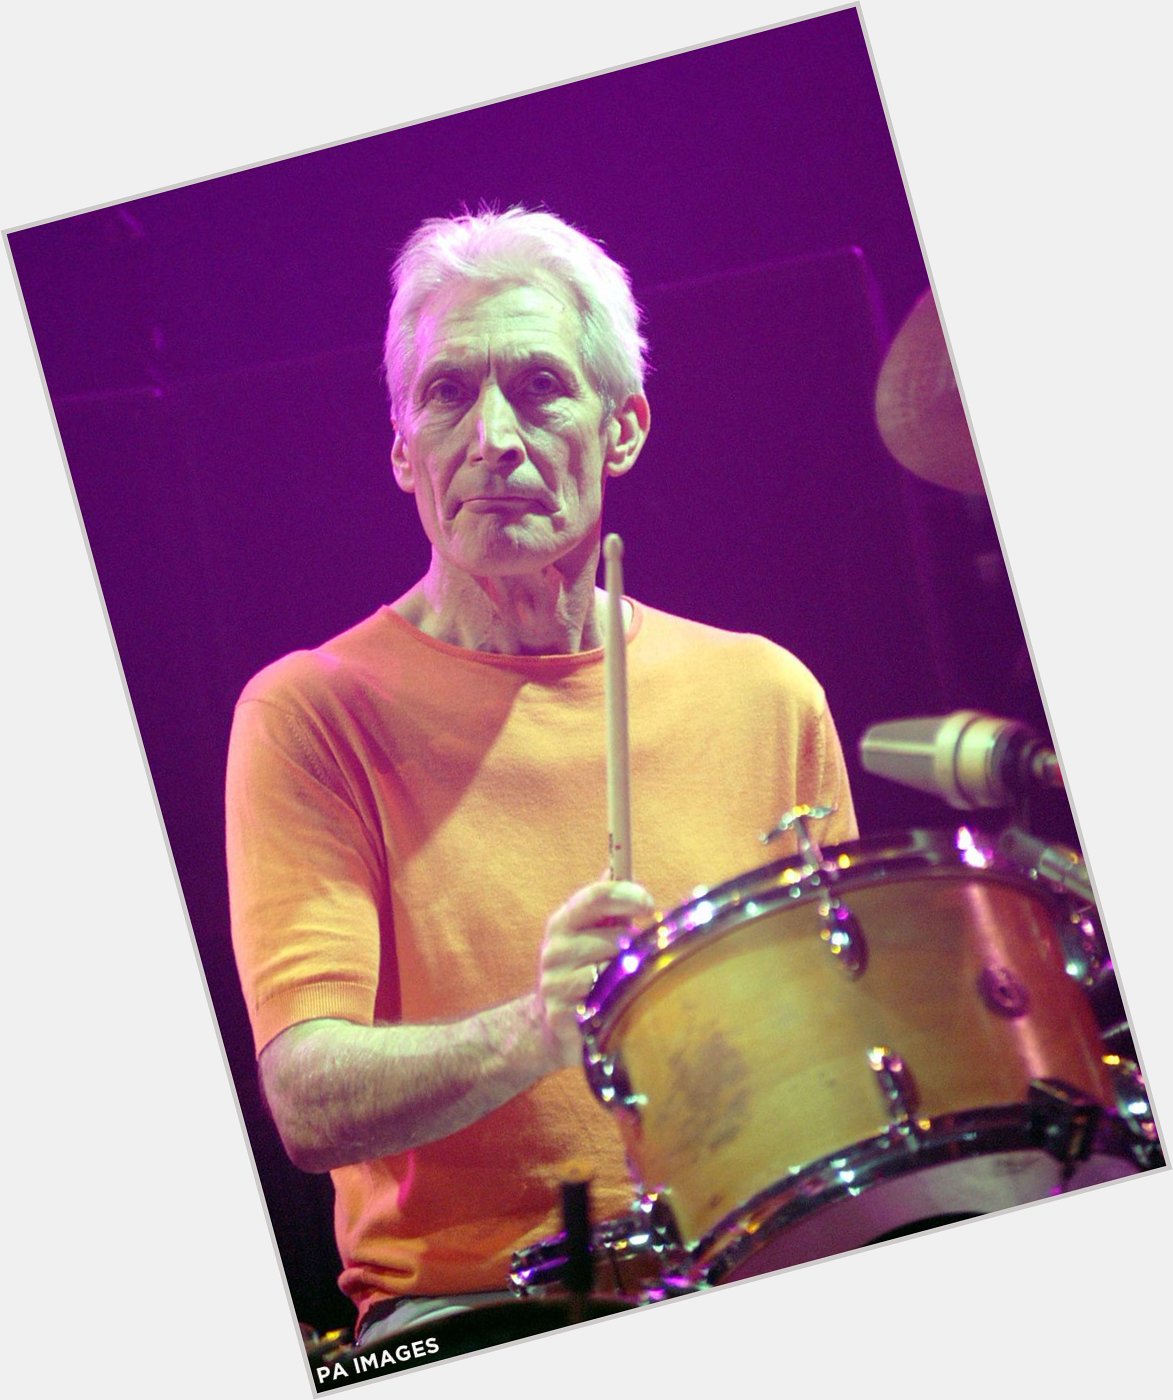 A massive Happy Birthday to Charlie Watts- 74 years old & still the coolest man in the Stones if not in all of rock. 